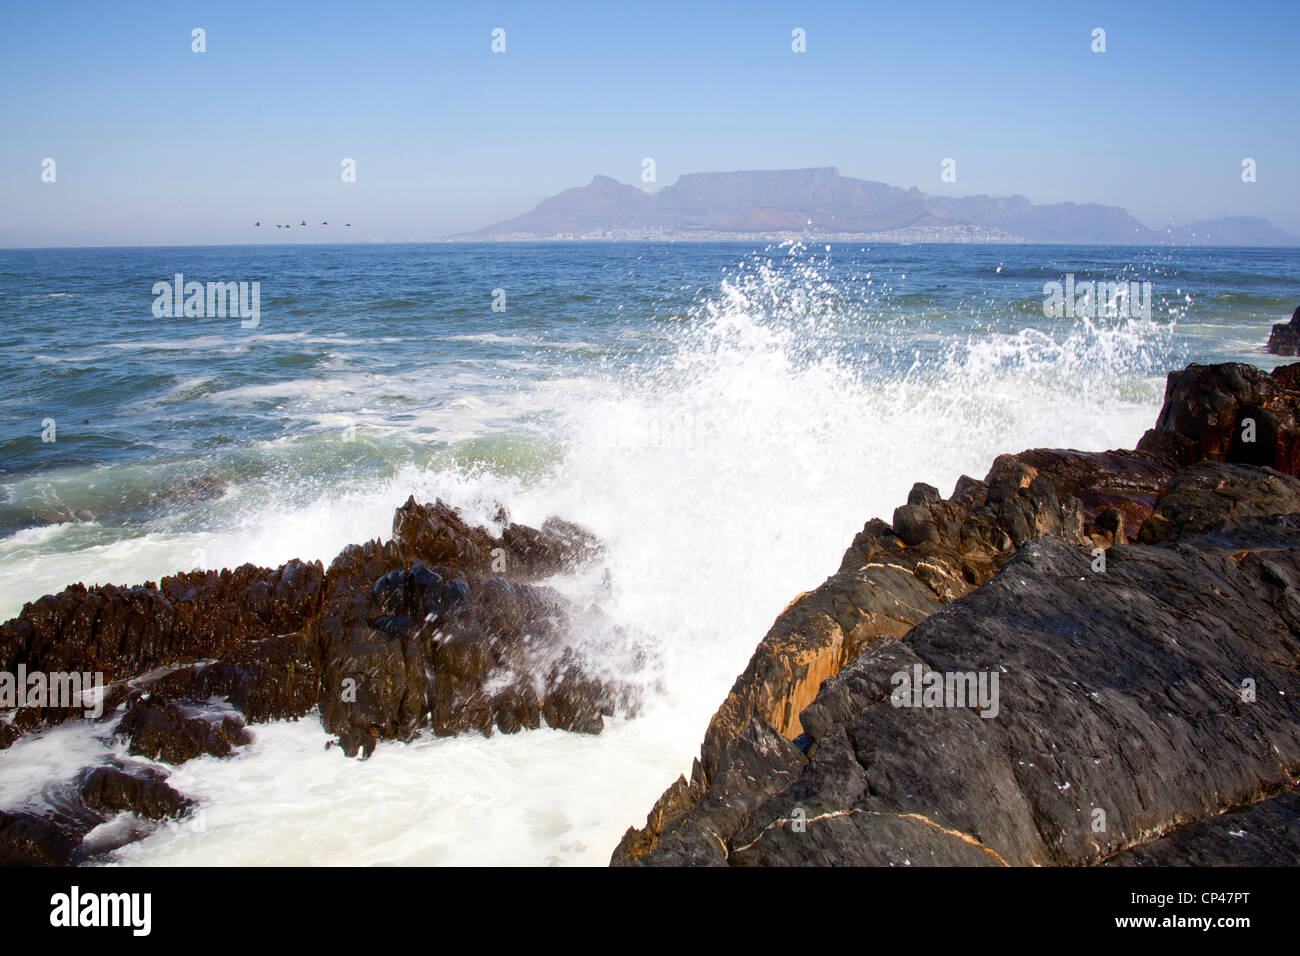 Table Mountain and Cape Town from Robin Island, Western Cape, South Africa Stock Photo